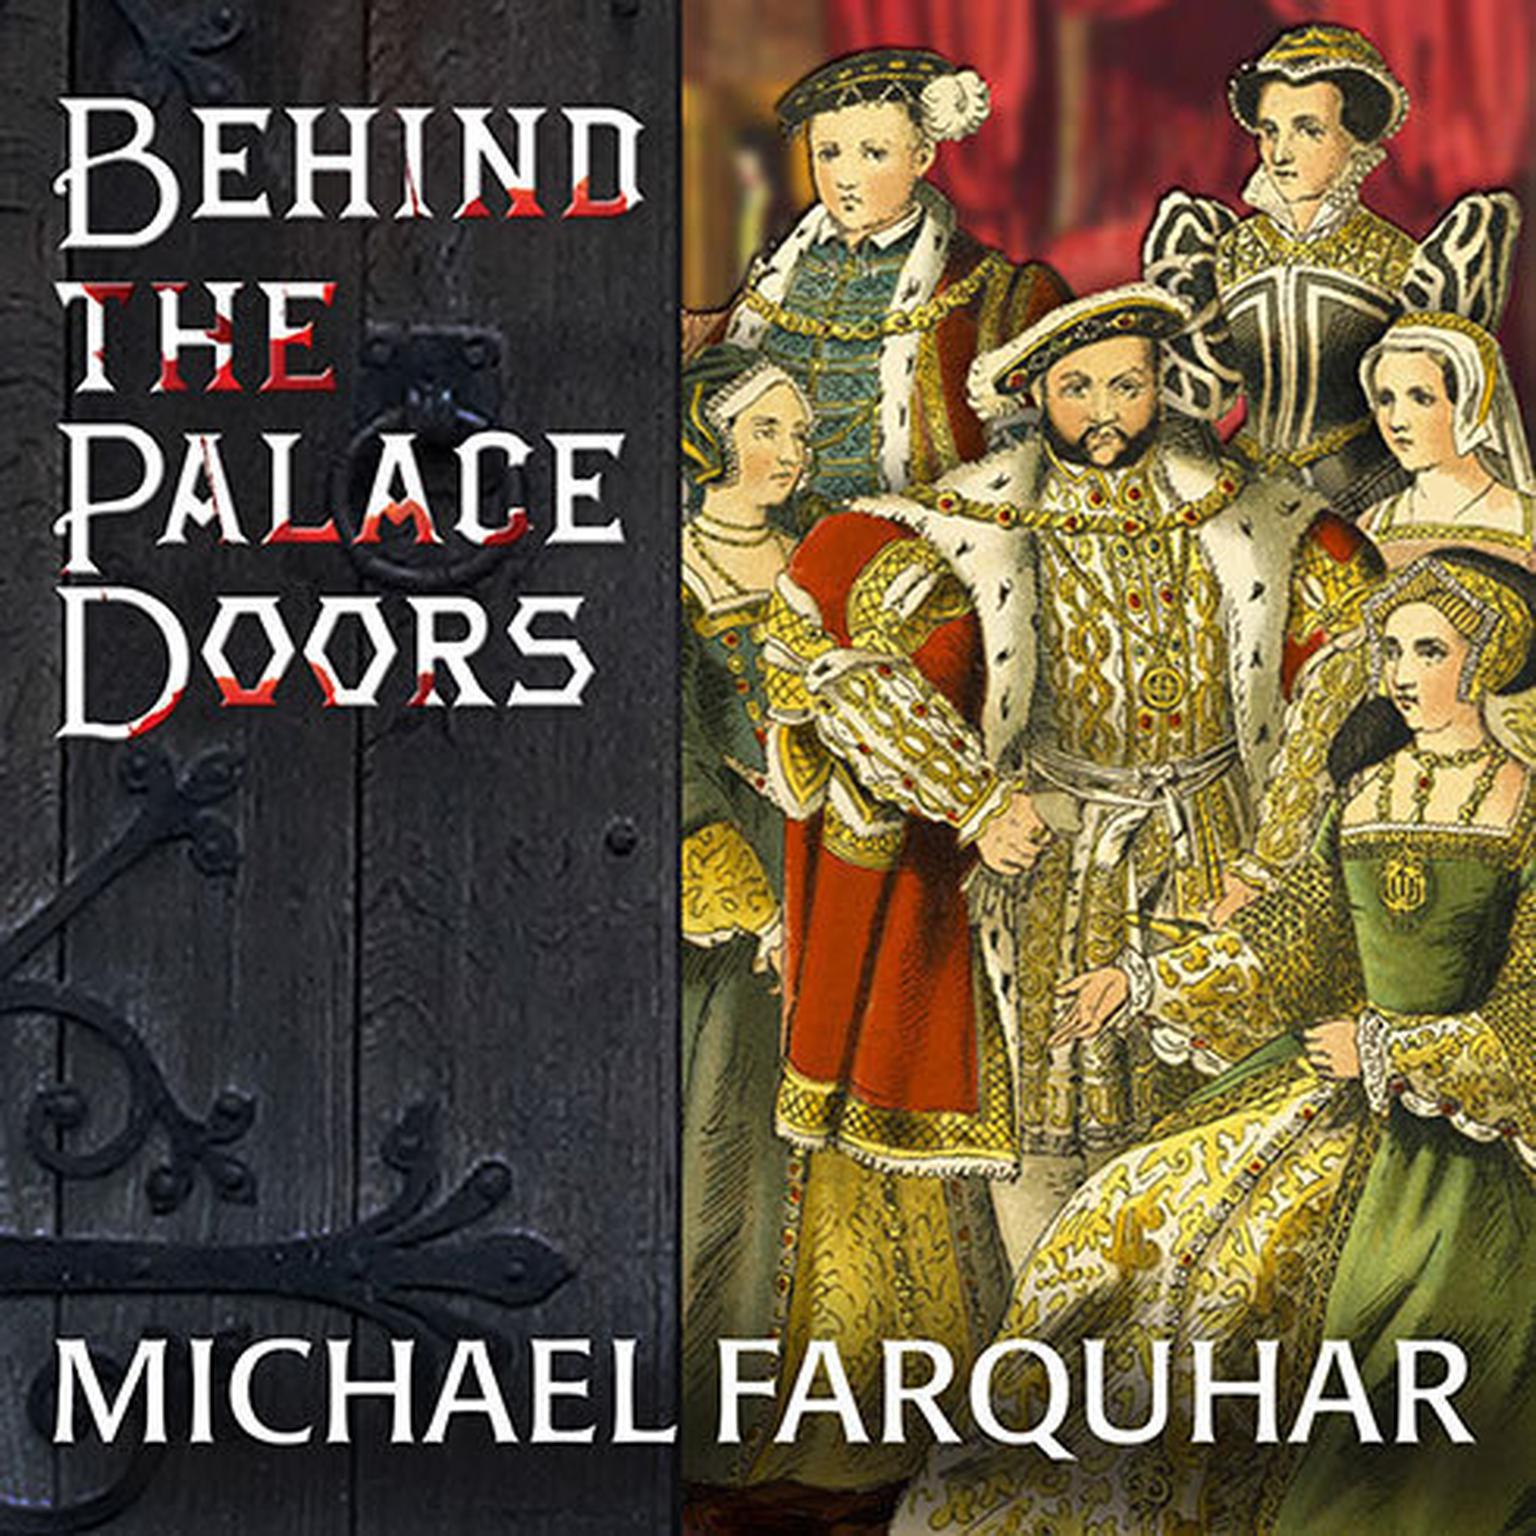 Behind the Palace Doors: Five Centuries of Sex, Adventure, Vice, Treachery, and Folly from Royal Britain Audiobook, by Michael Farquhar